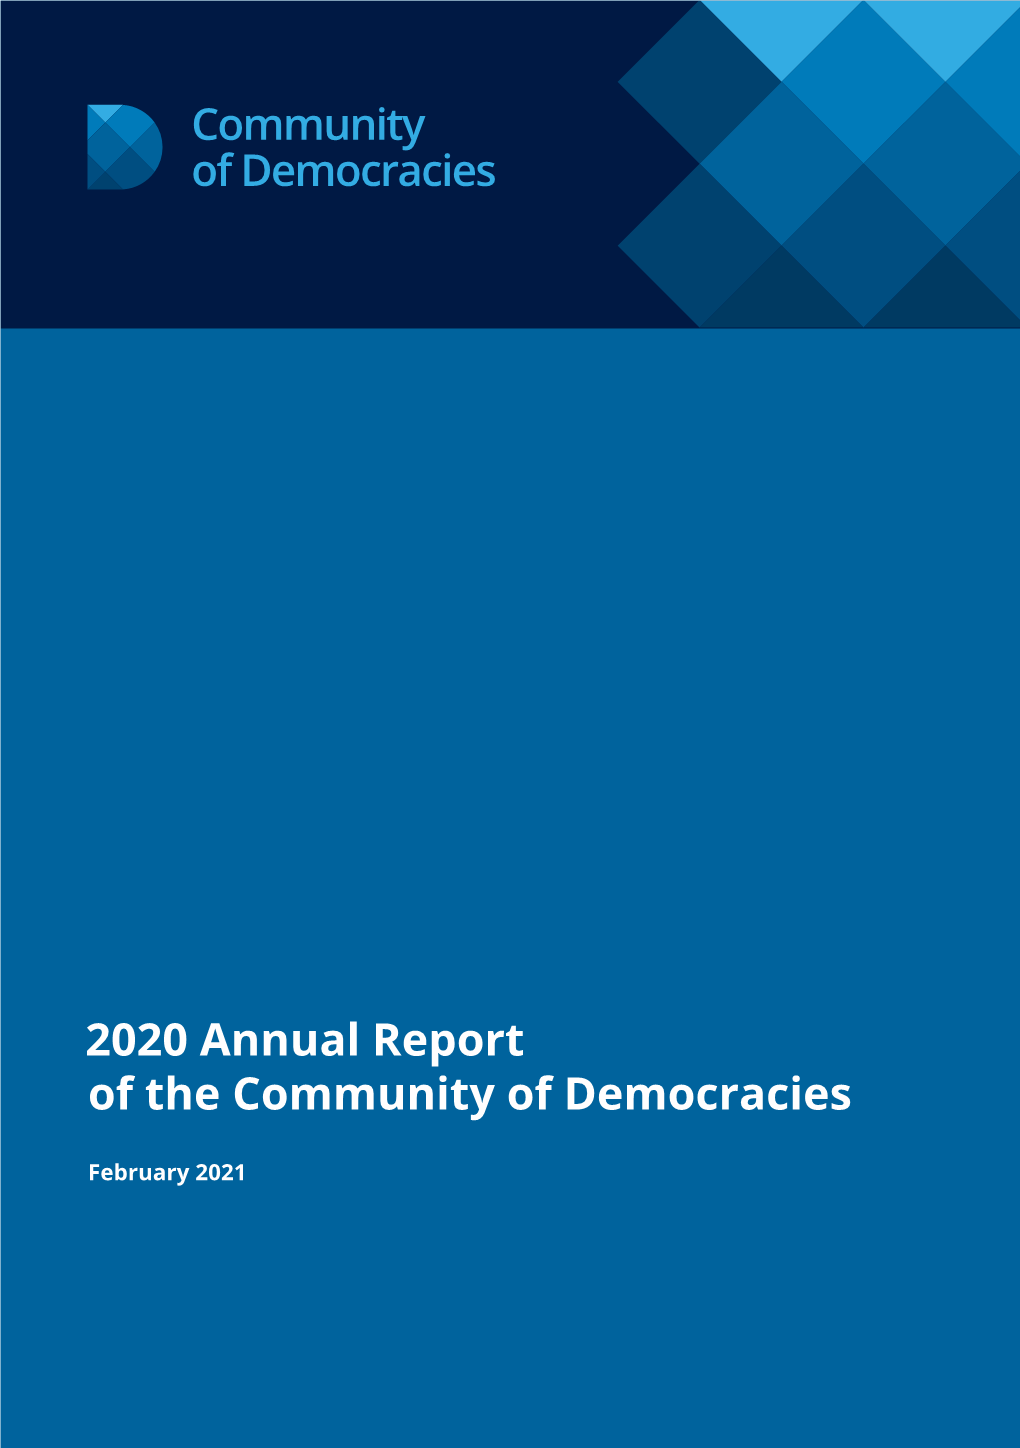 2020 Annual Report of the Community of Democracies